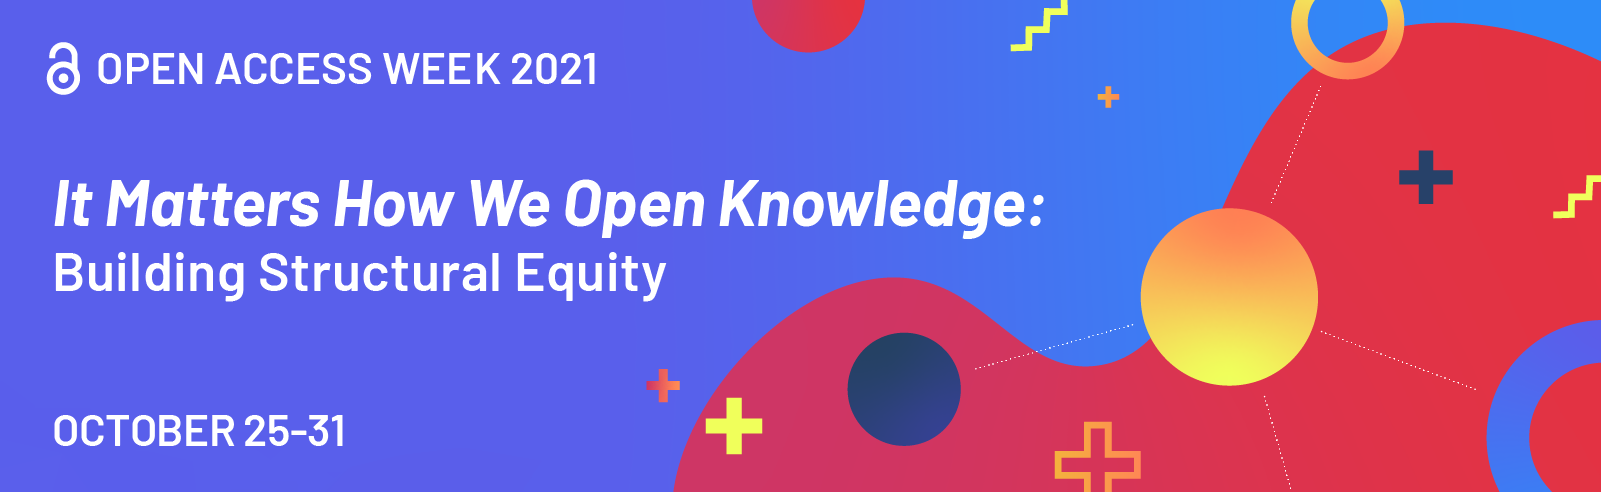 A colorful graphic announces Open Access Week 2021 with text that reads It Matters How we Open Knowledge, building structural integrity